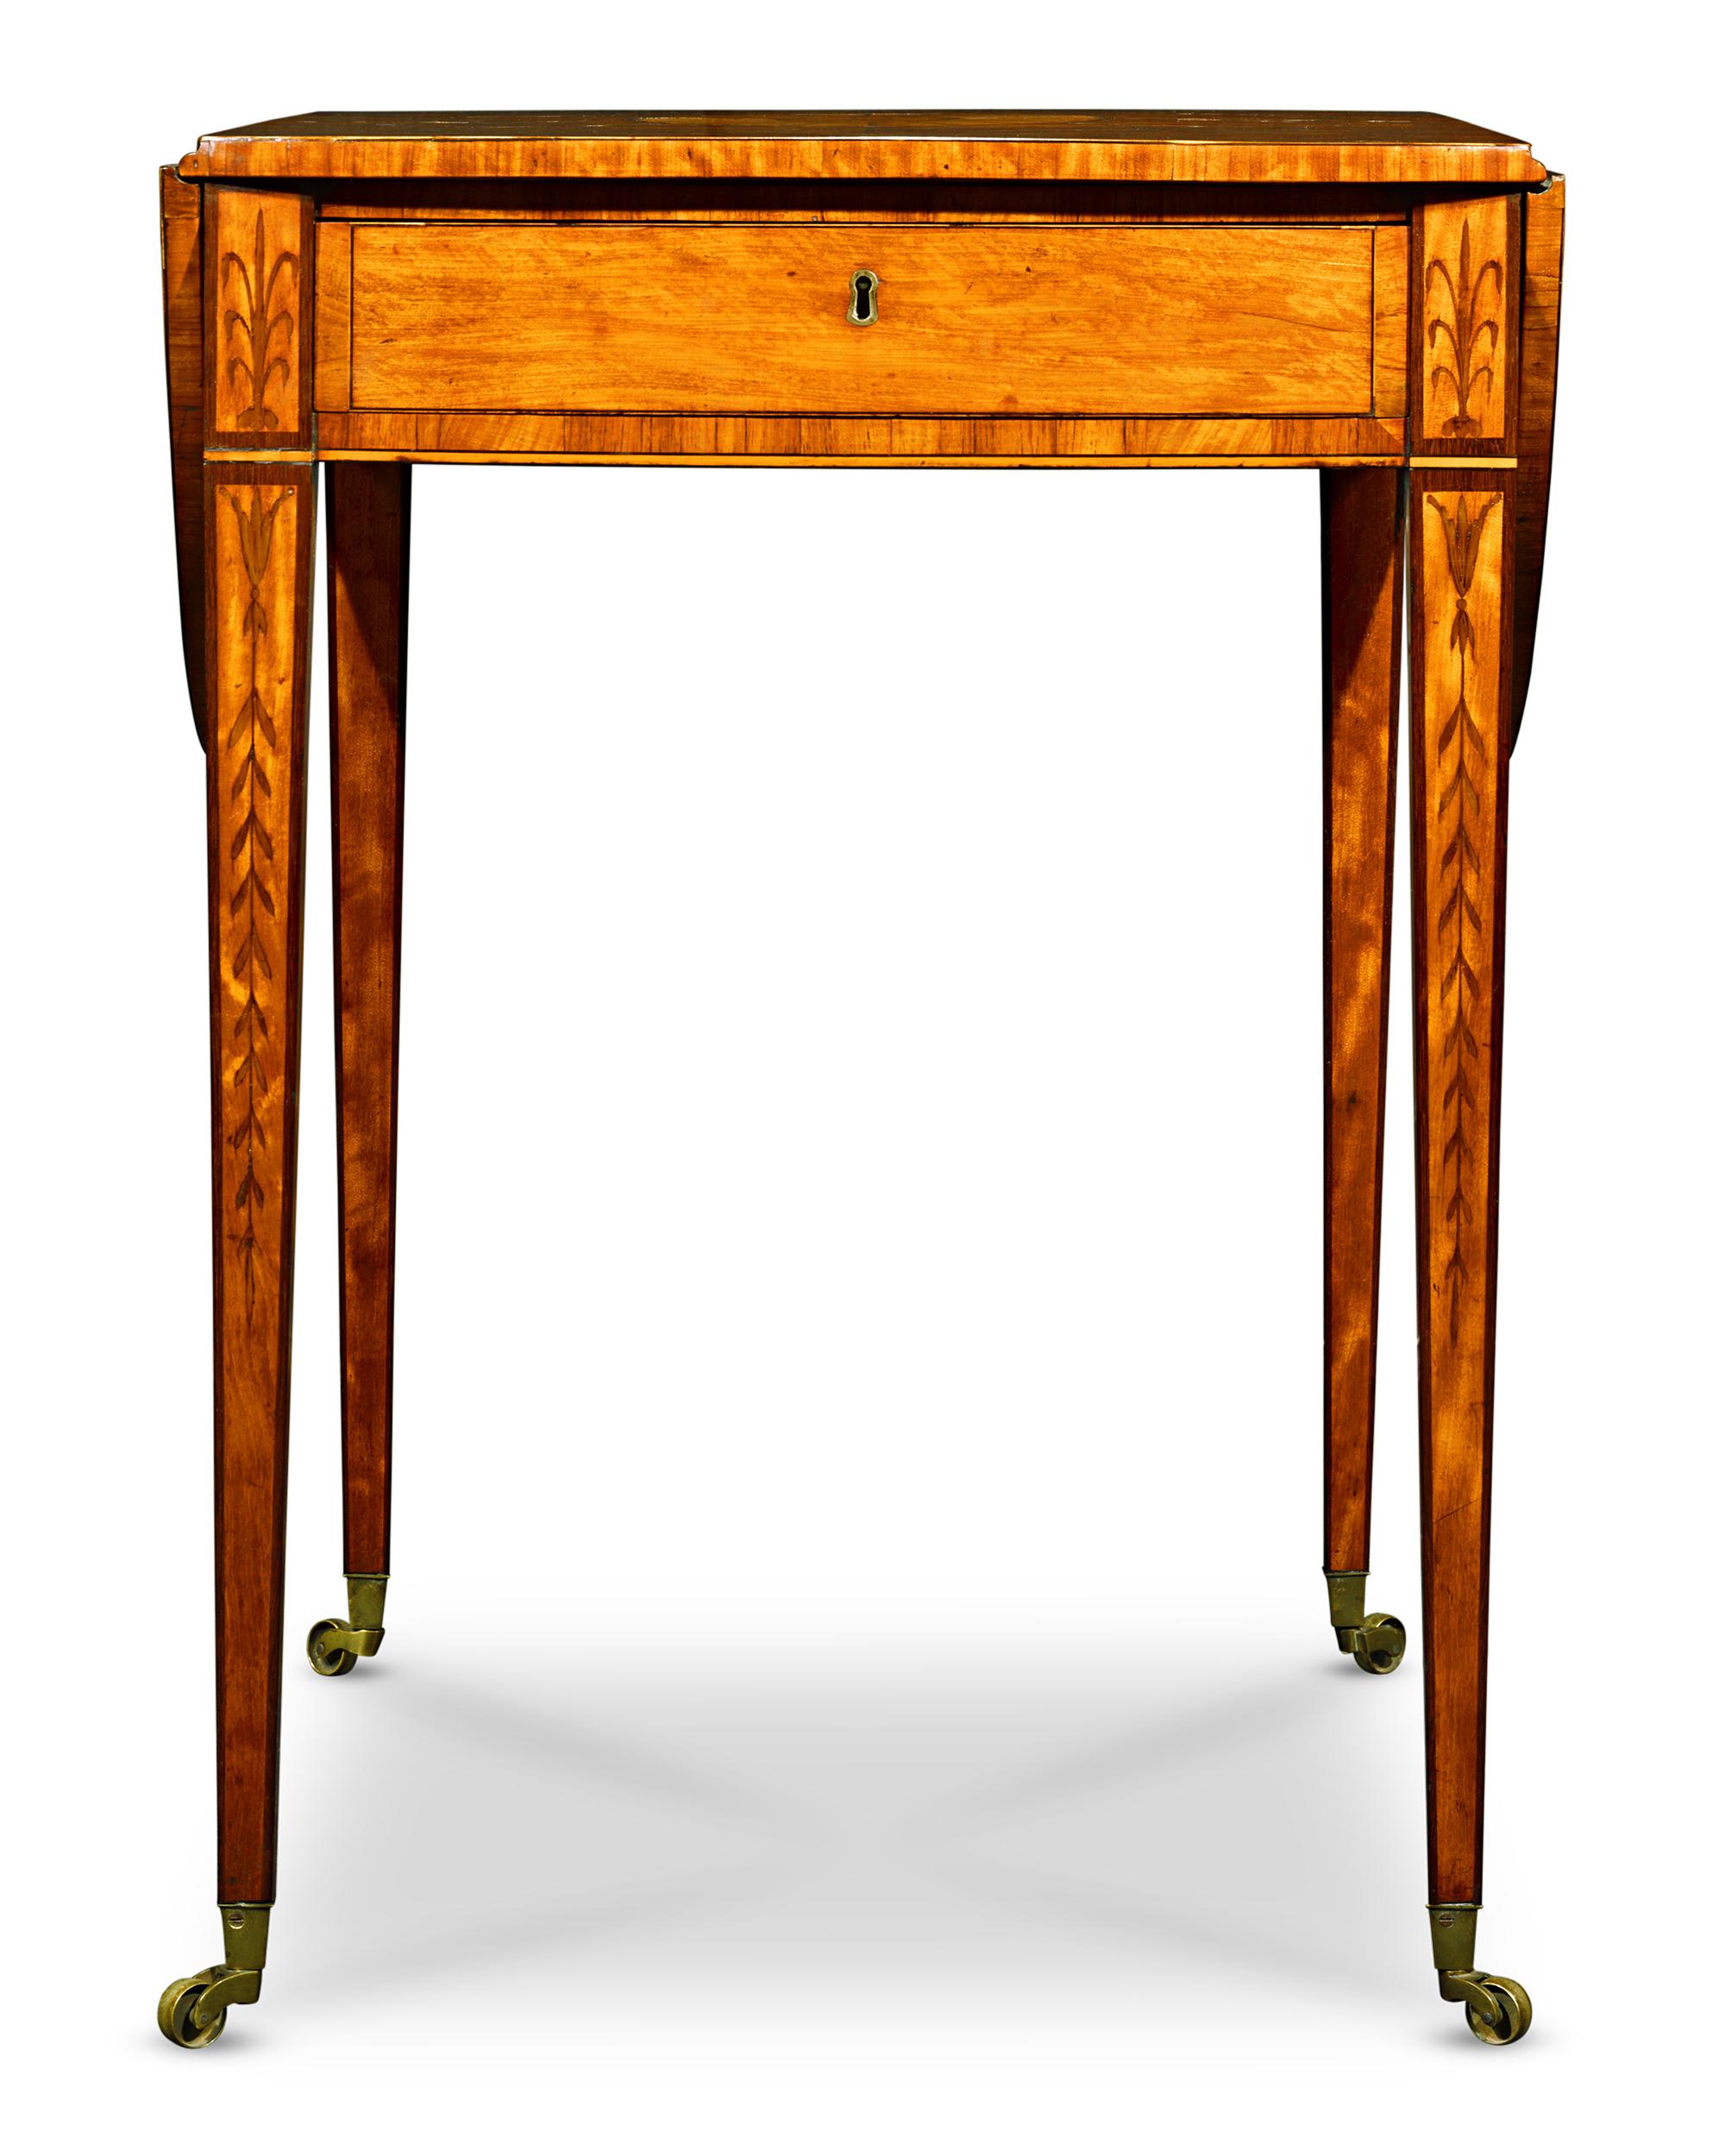 This extraordinary George III-period Pembroke table by London cabinetmakers Ince & Mayhew displays the understated sophistication of the late Georgian era. The surface of the table — including both the central panel and the signature Pembroke hinged